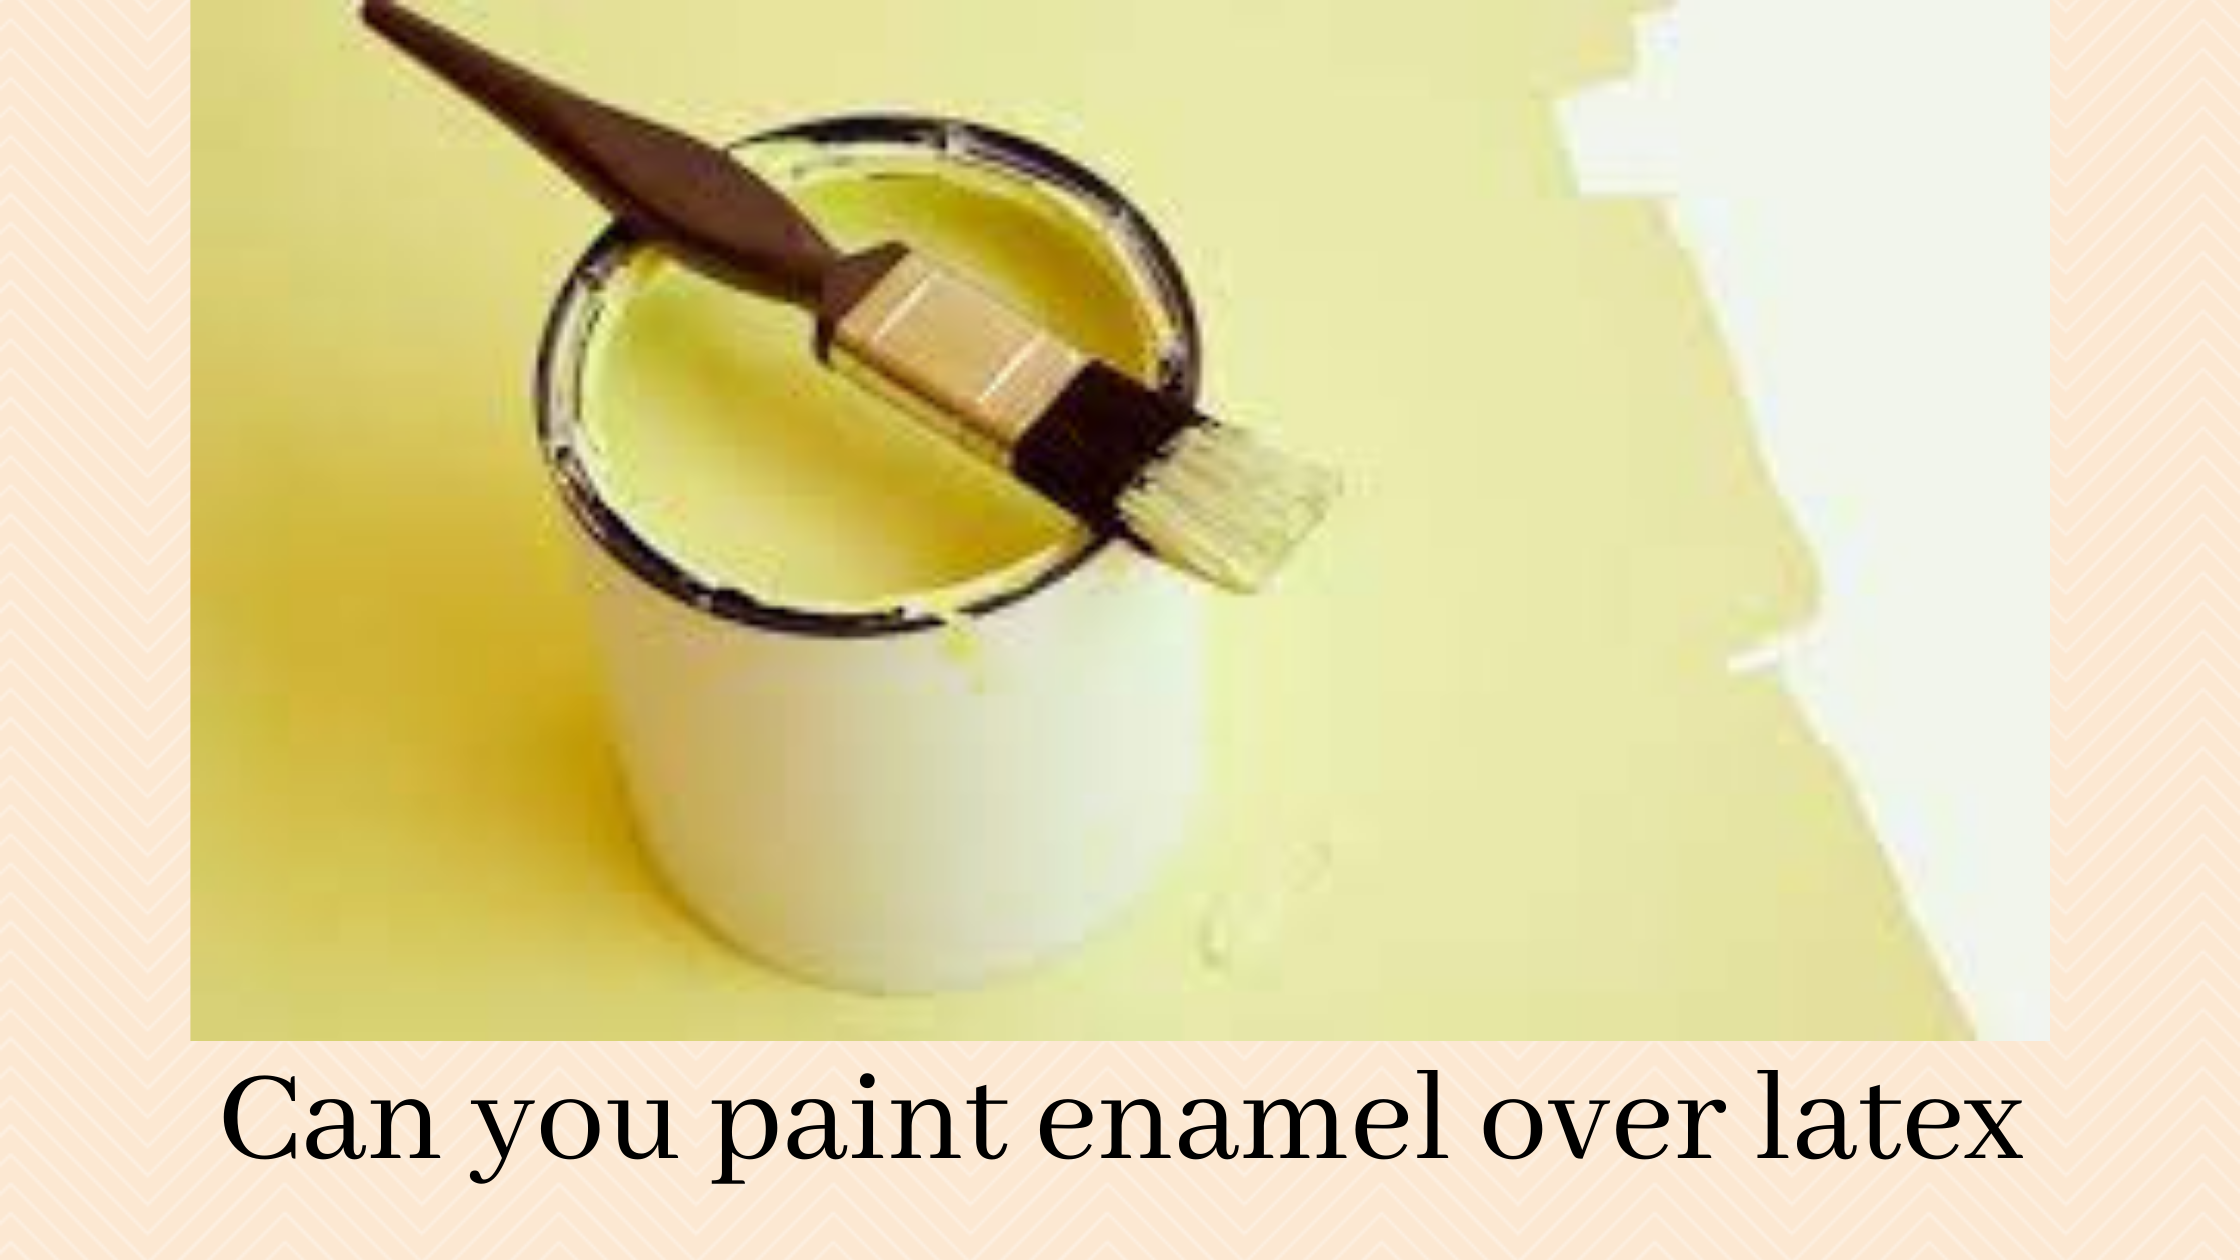 Can you paint enamel over latex